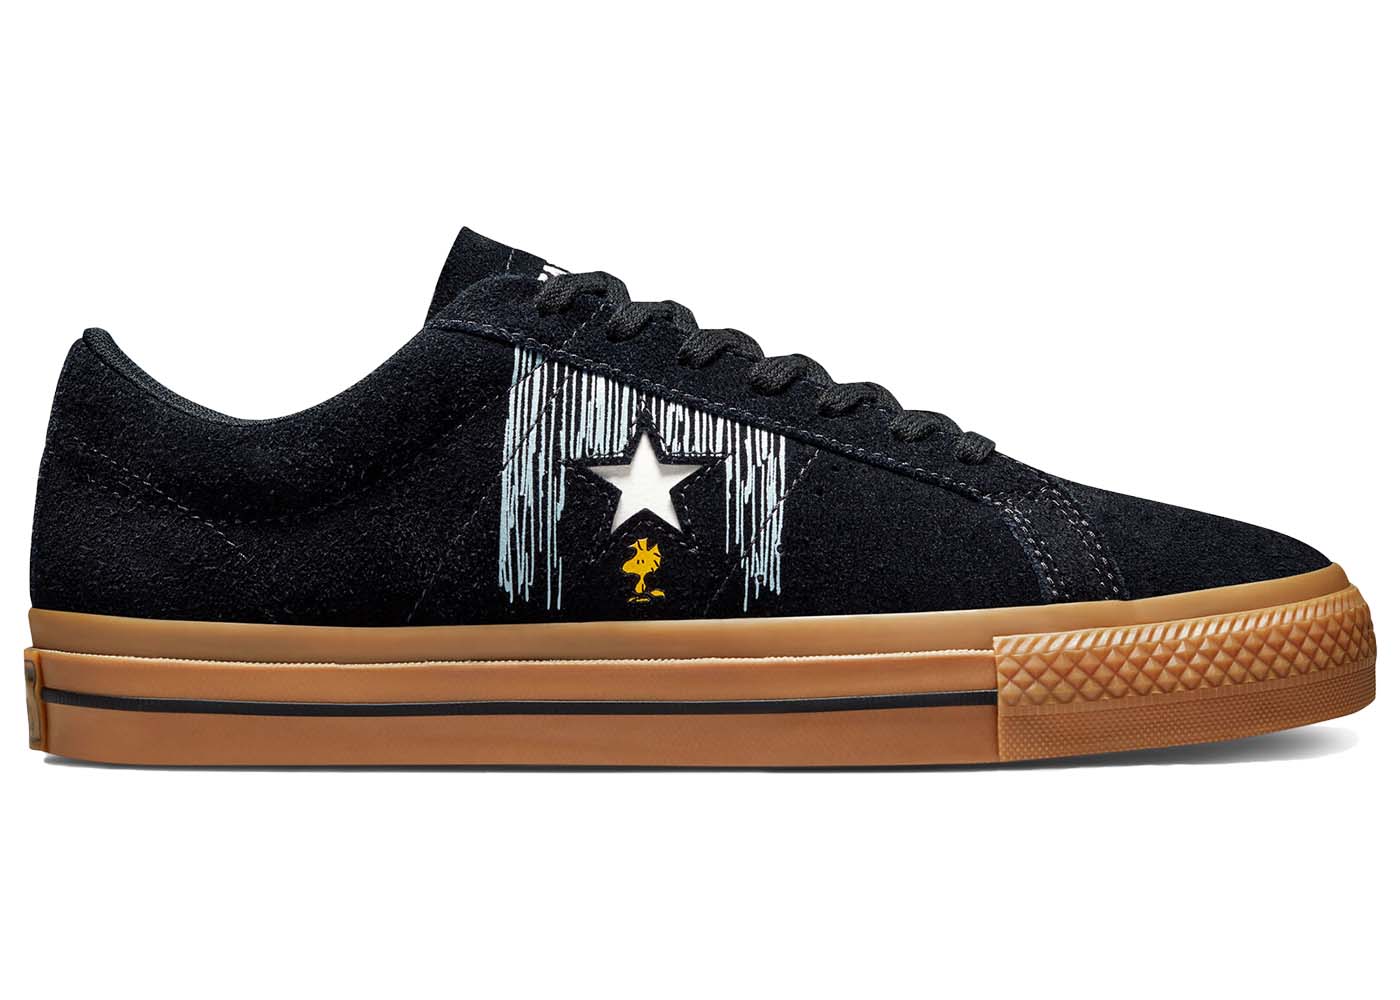 Converse One Star Ox Peanuts Snoopy and Woodstock - A01873C 